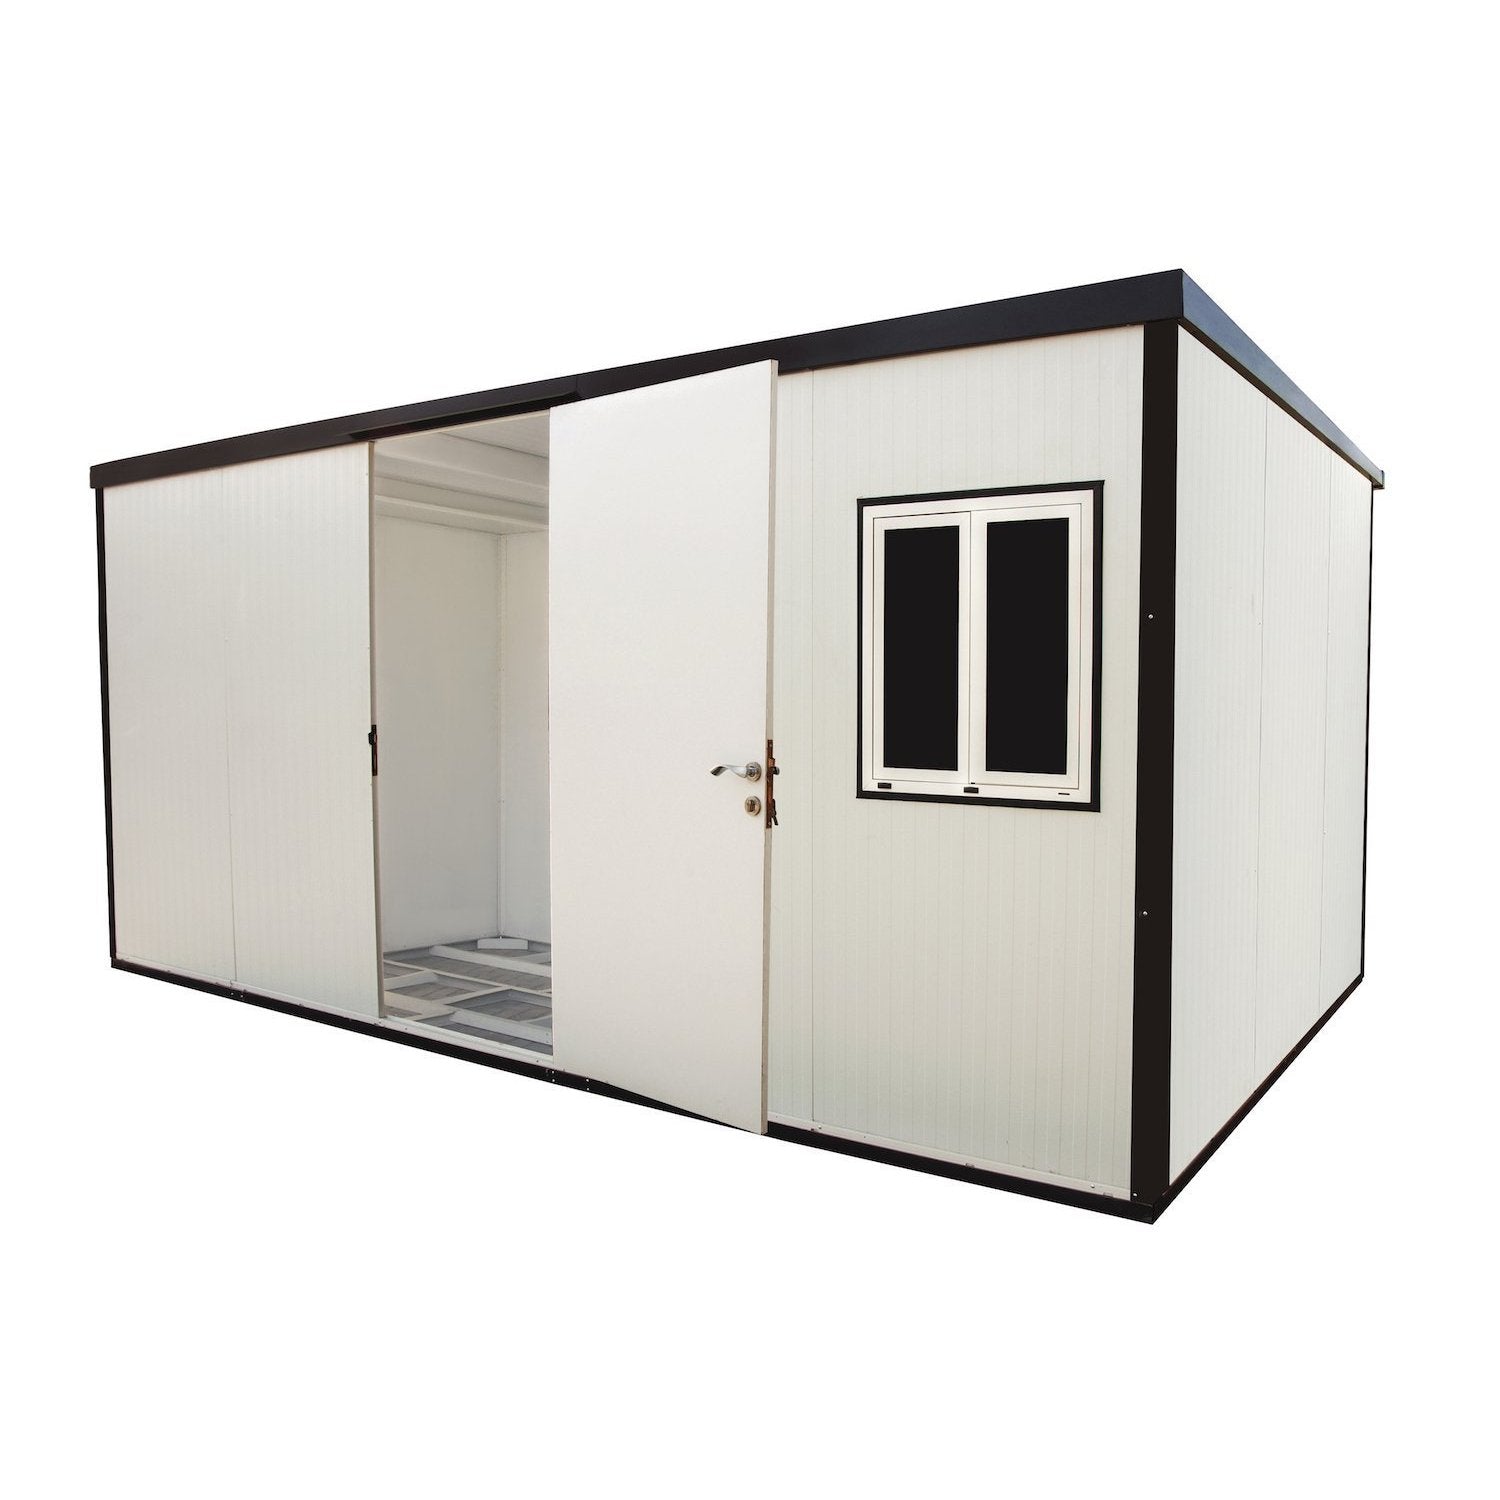 Duramax Insulated Buildings Flat Top Insulated Buildings 16 ft. W x 10 ft. D